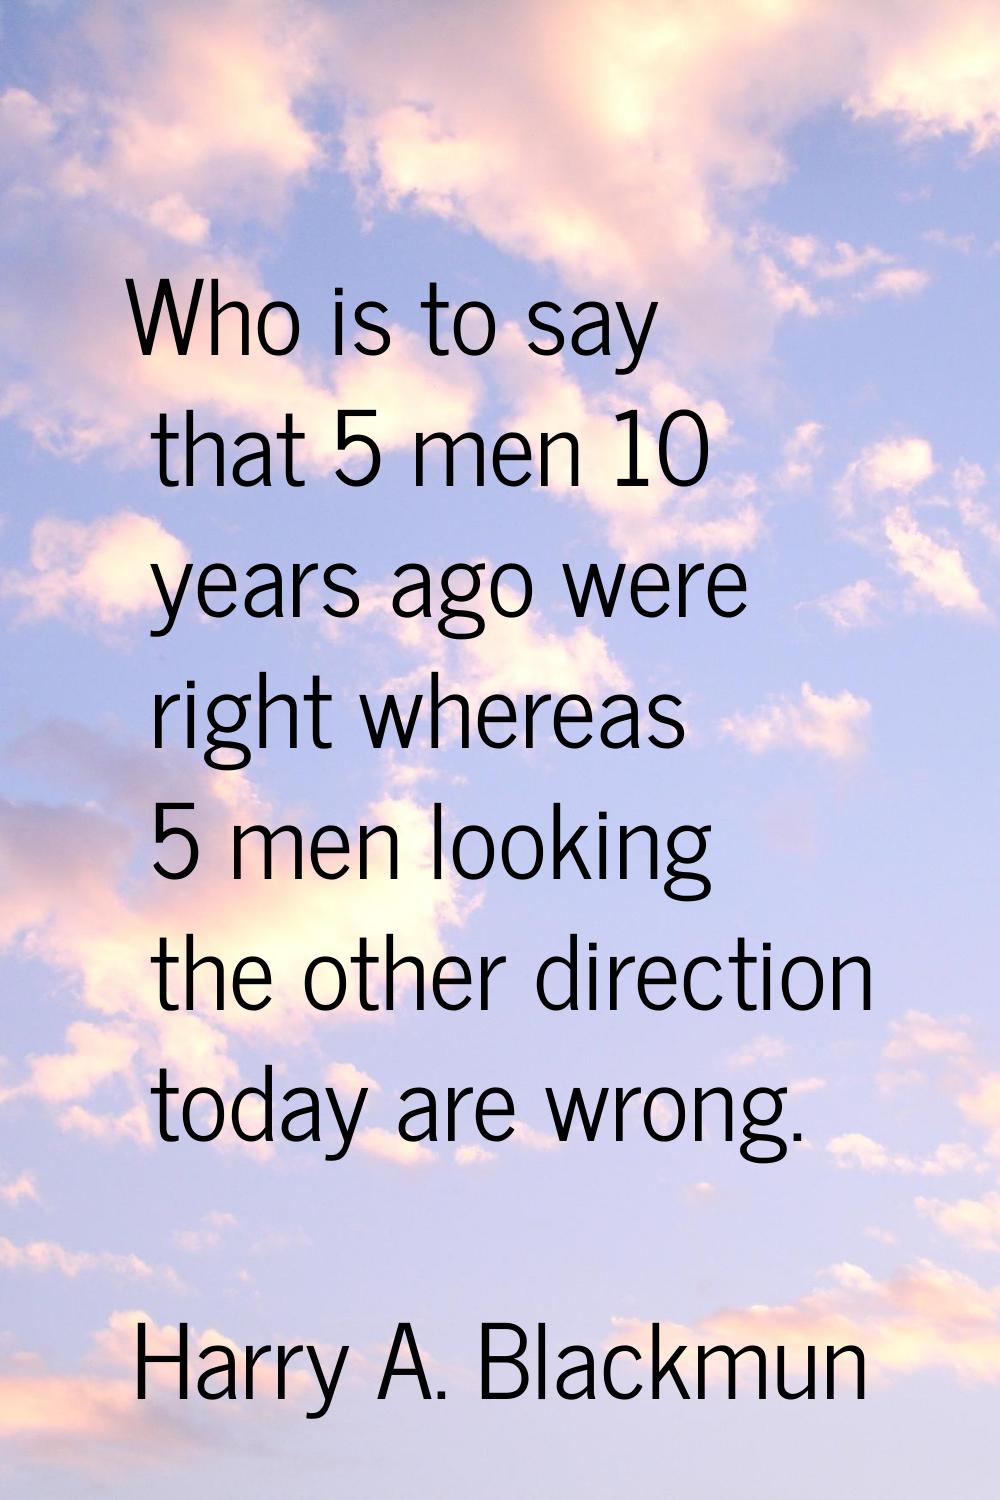 Who is to say that 5 men 10 years ago were right whereas 5 men looking the other direction today ar